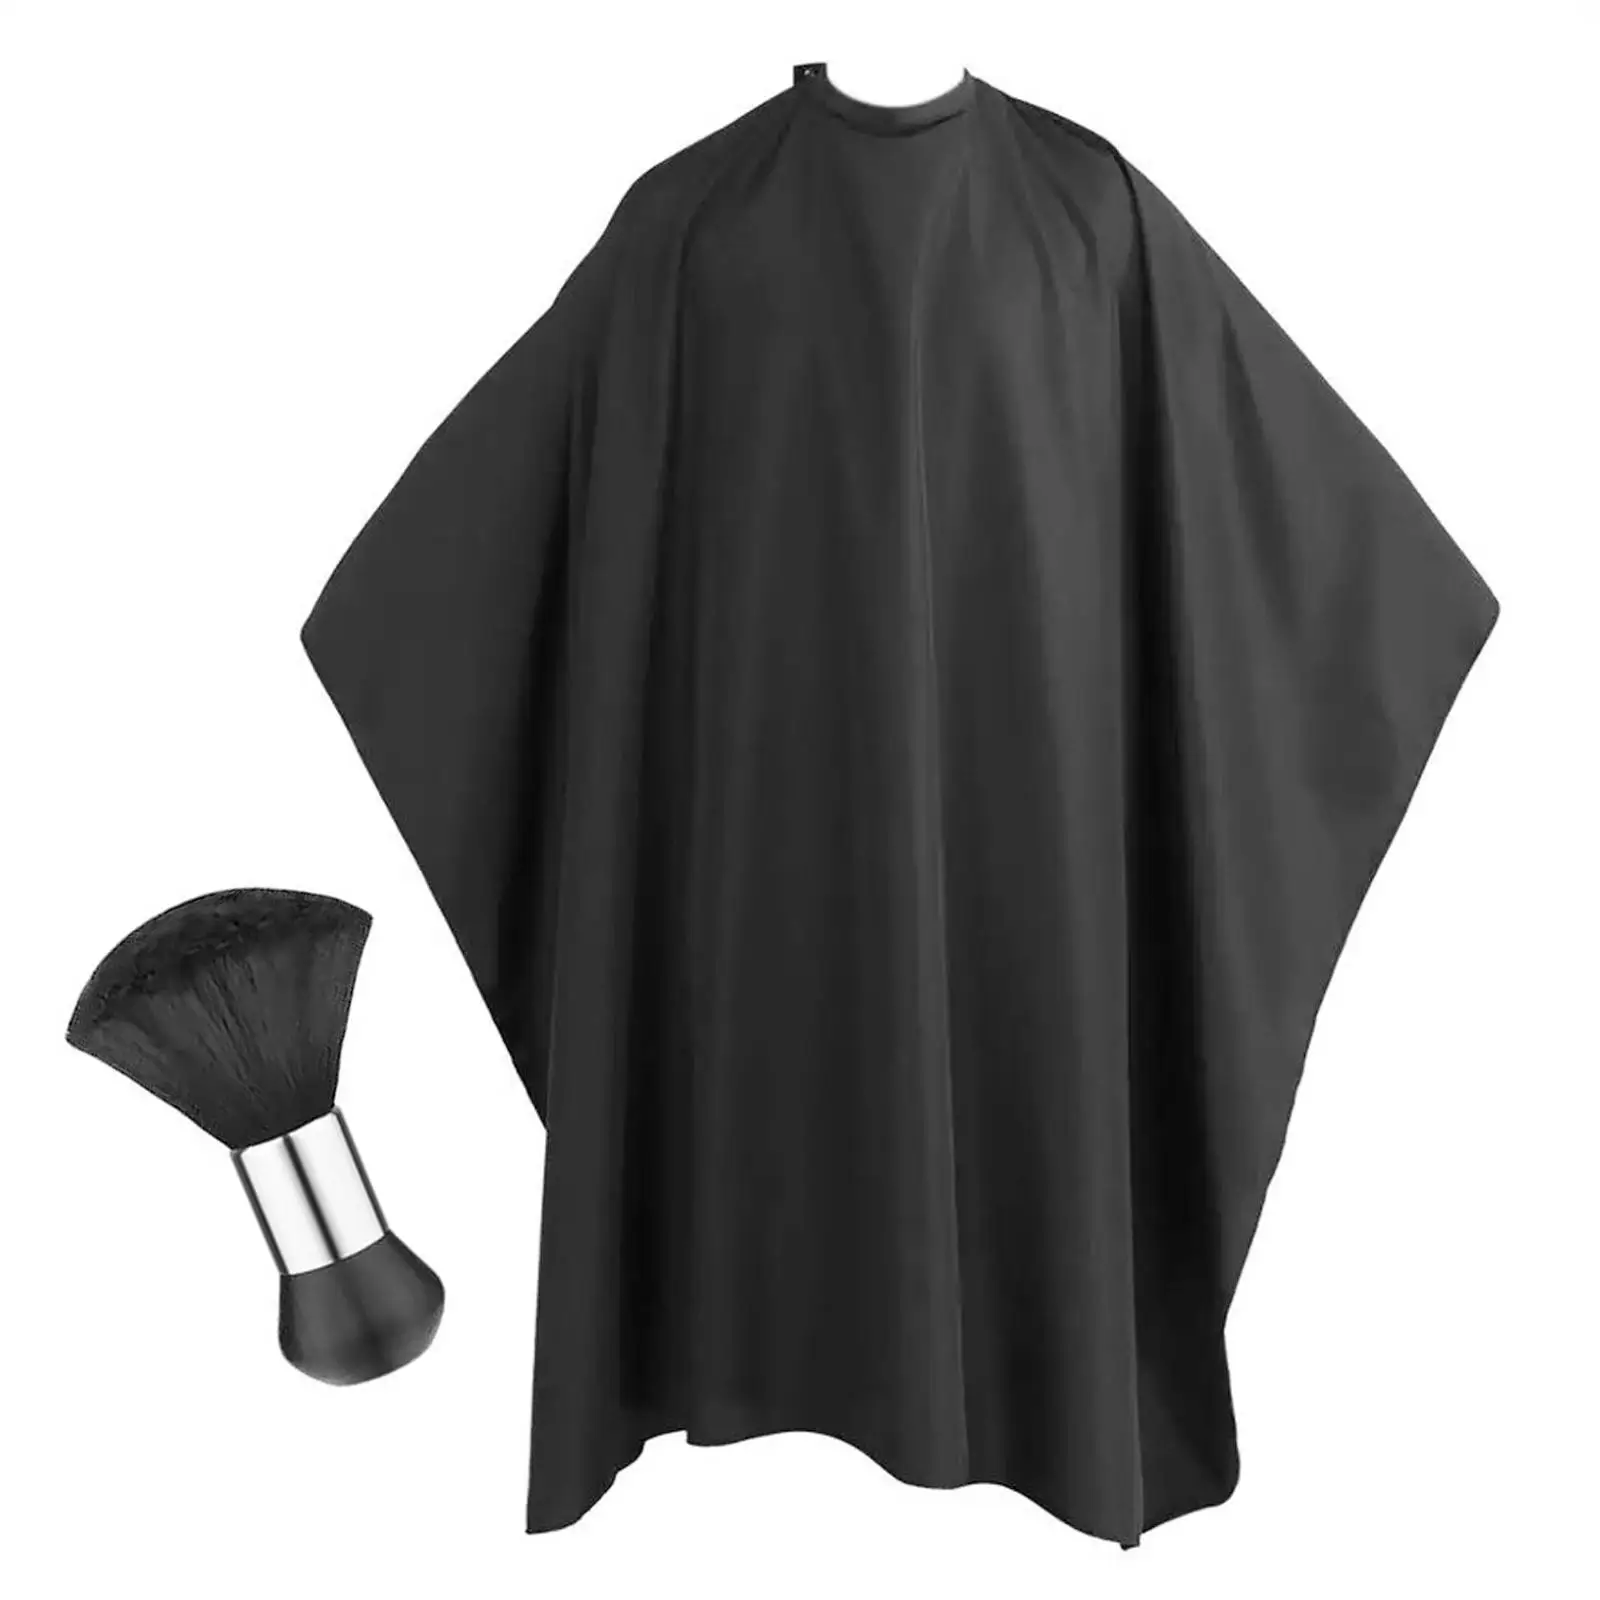 Hairdresser Cape with Neck Duster Brush Black Professional Barber Cape for Hair Cutting Accessories Hairstylists Styling Haircut